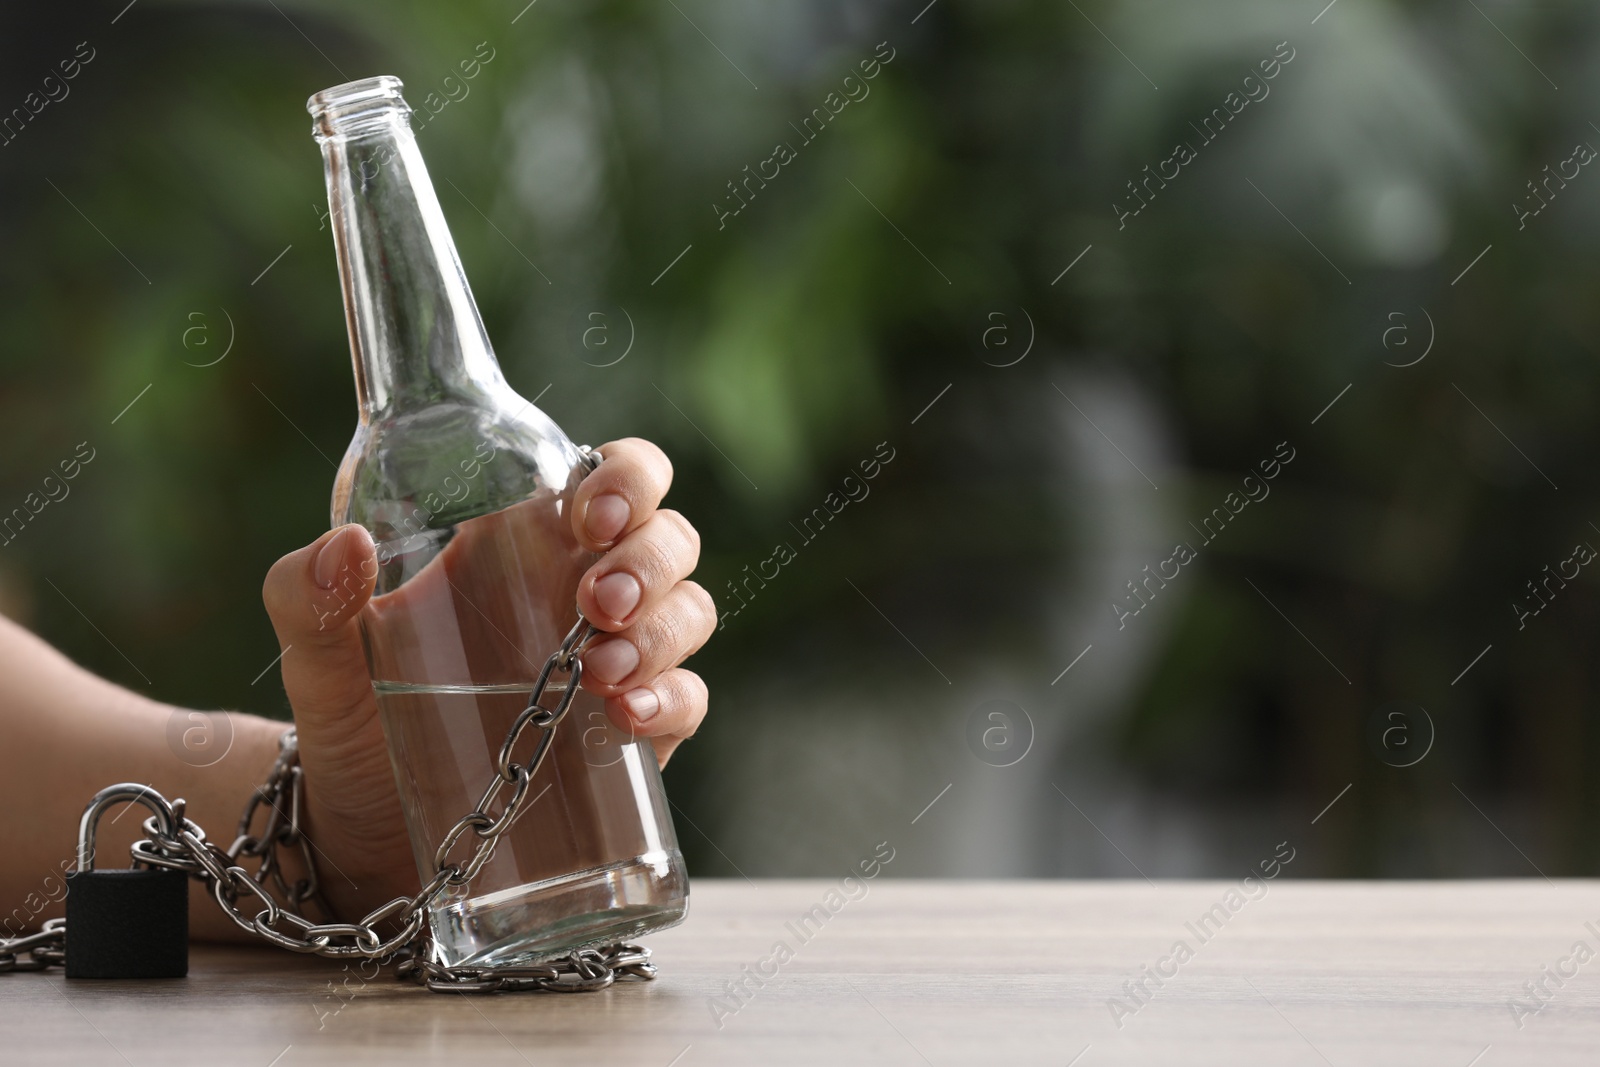 Photo of Man chained to bottle of vodka at table against blurred background, closeup with space for text. Alcohol addiction